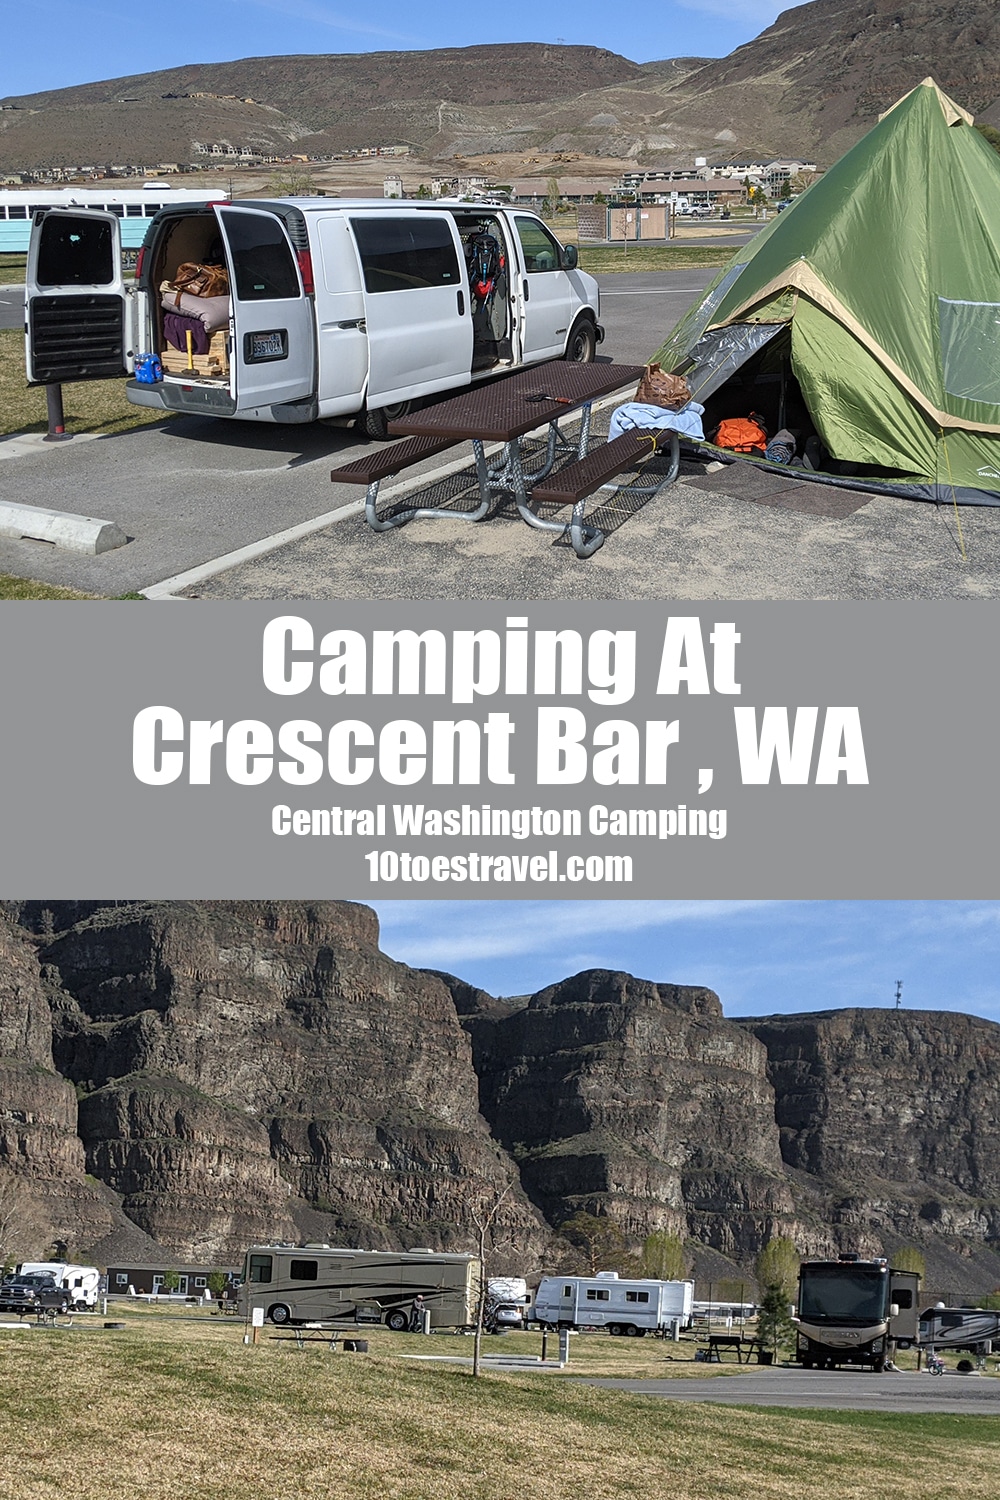 Information on camping at Crescent Bar Recreation Area near Quincy, Washington